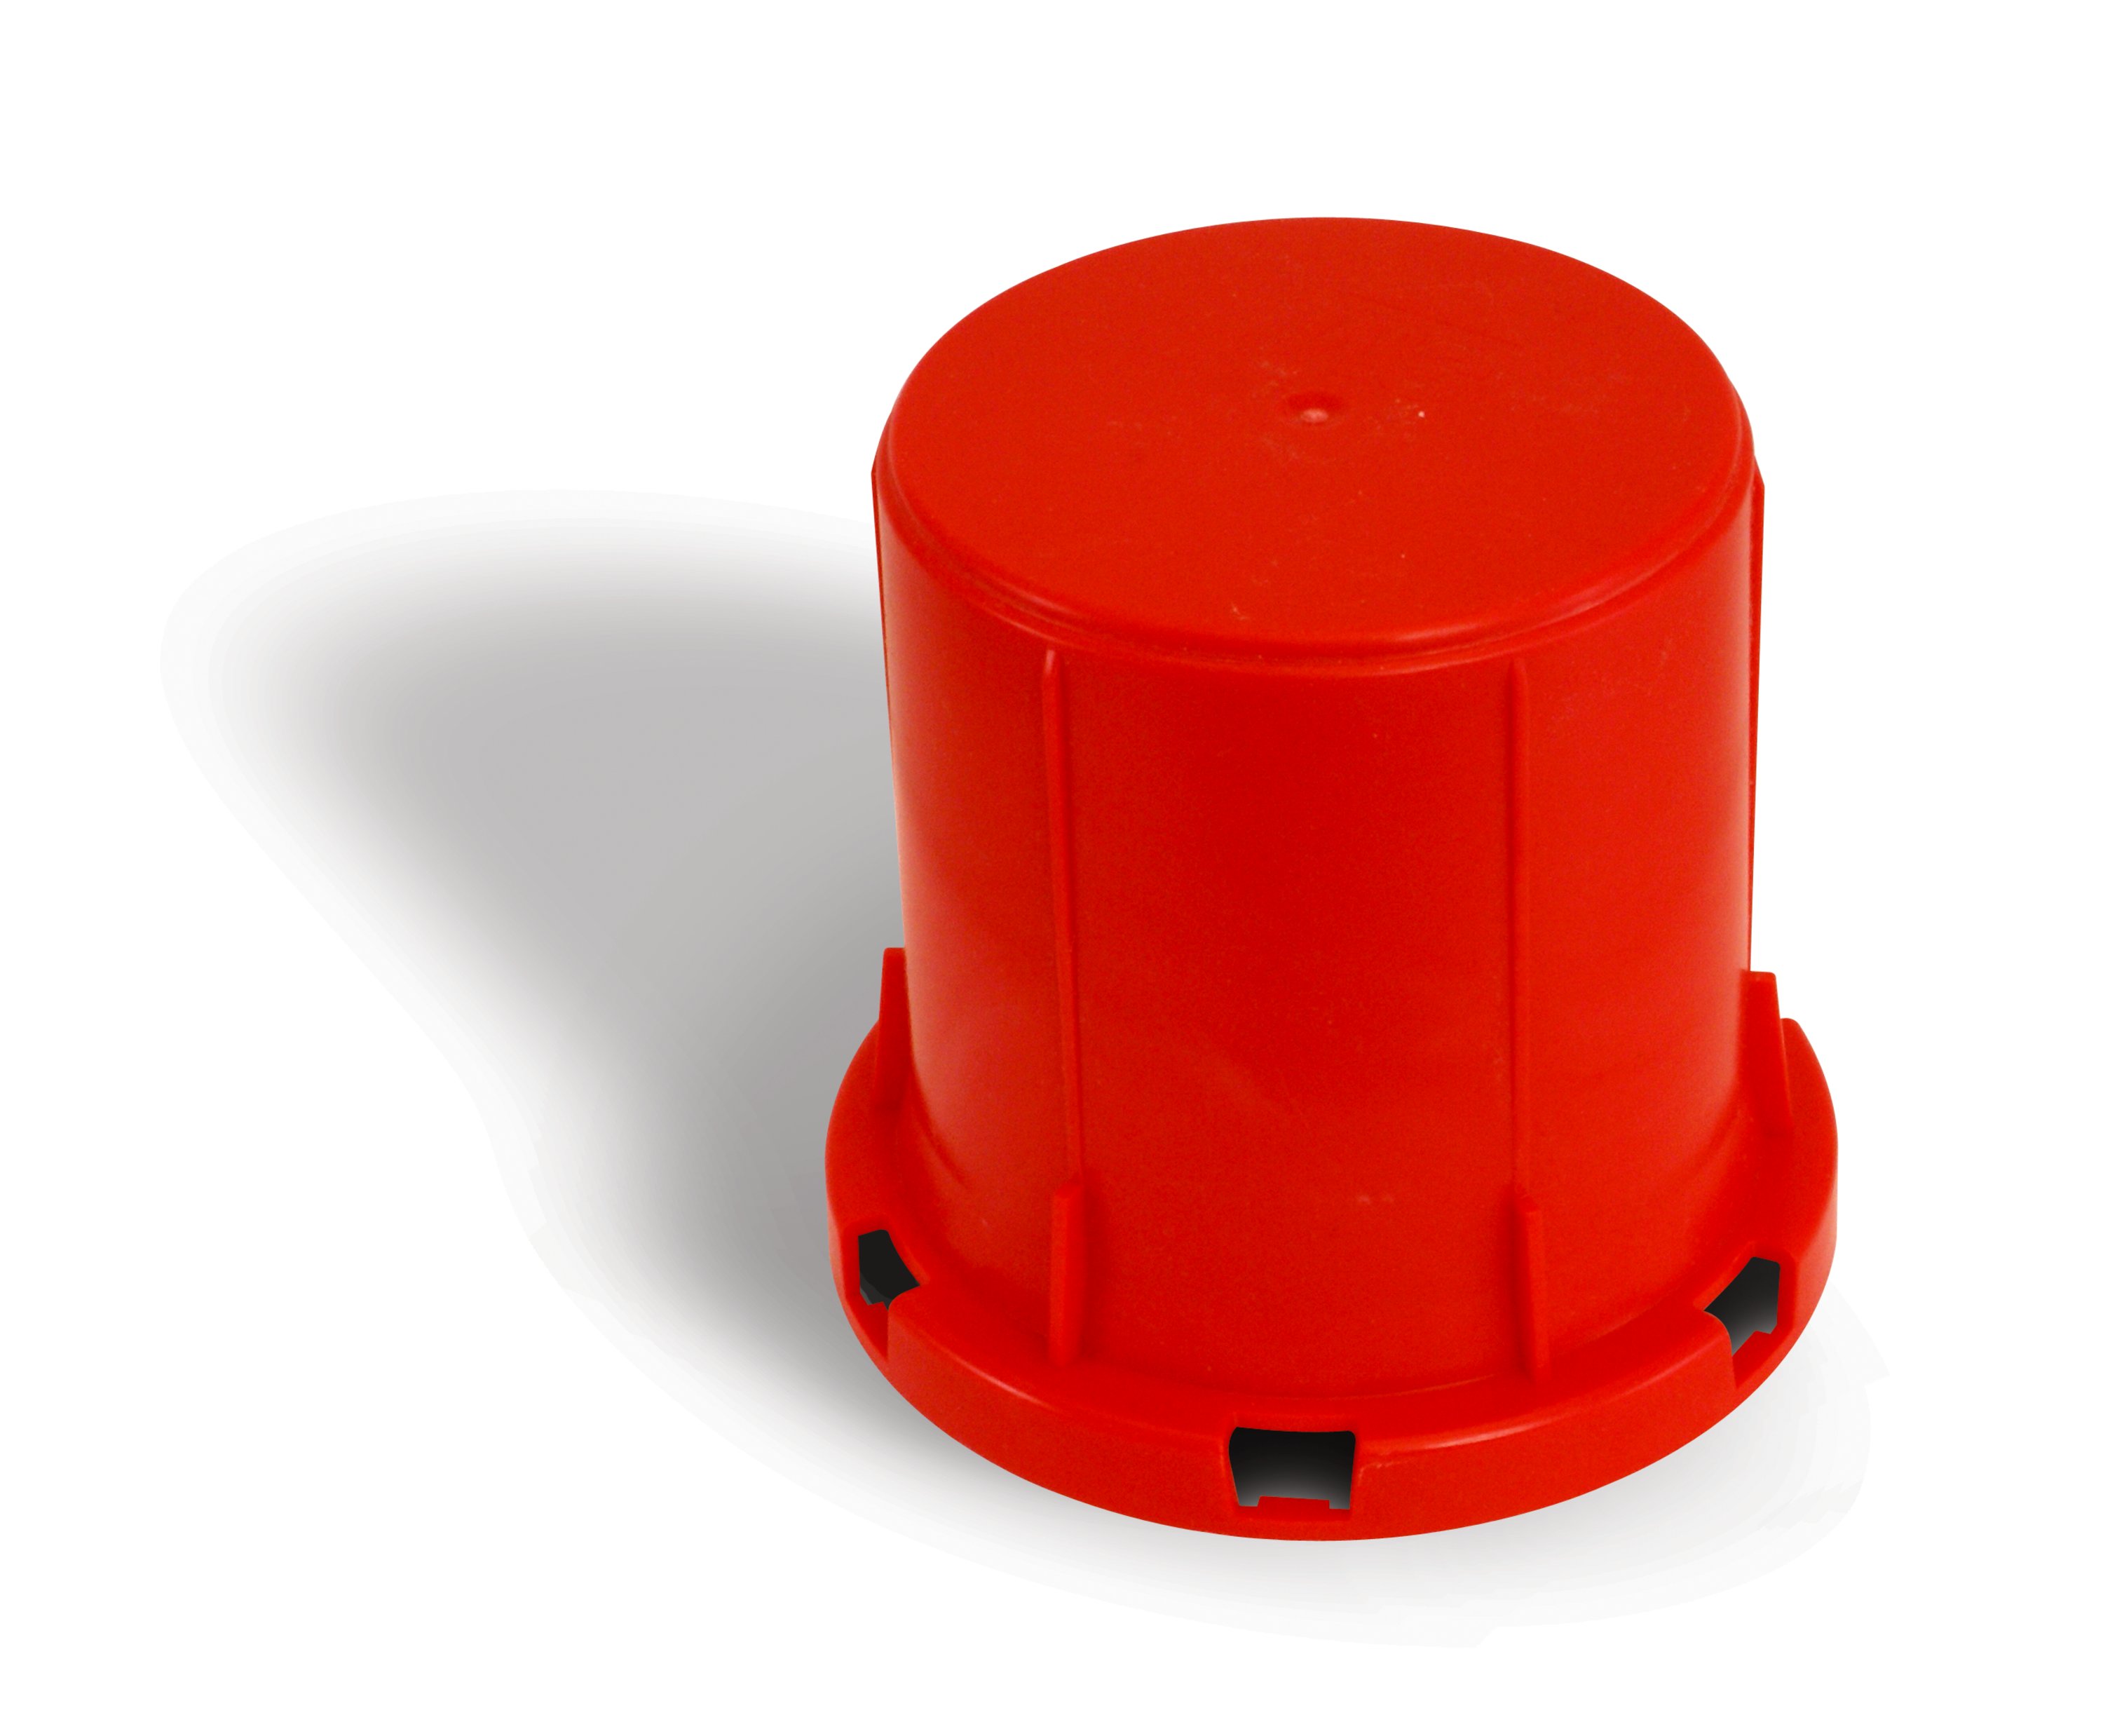 3M™ Fire Barrier Cast-In Device Height Adaptors allow installers to increase the height of 3M™ Fire Barrier Cast-In Devices to accommodate concrete  slab pours up to 12 inches (304.8 mm) deep.